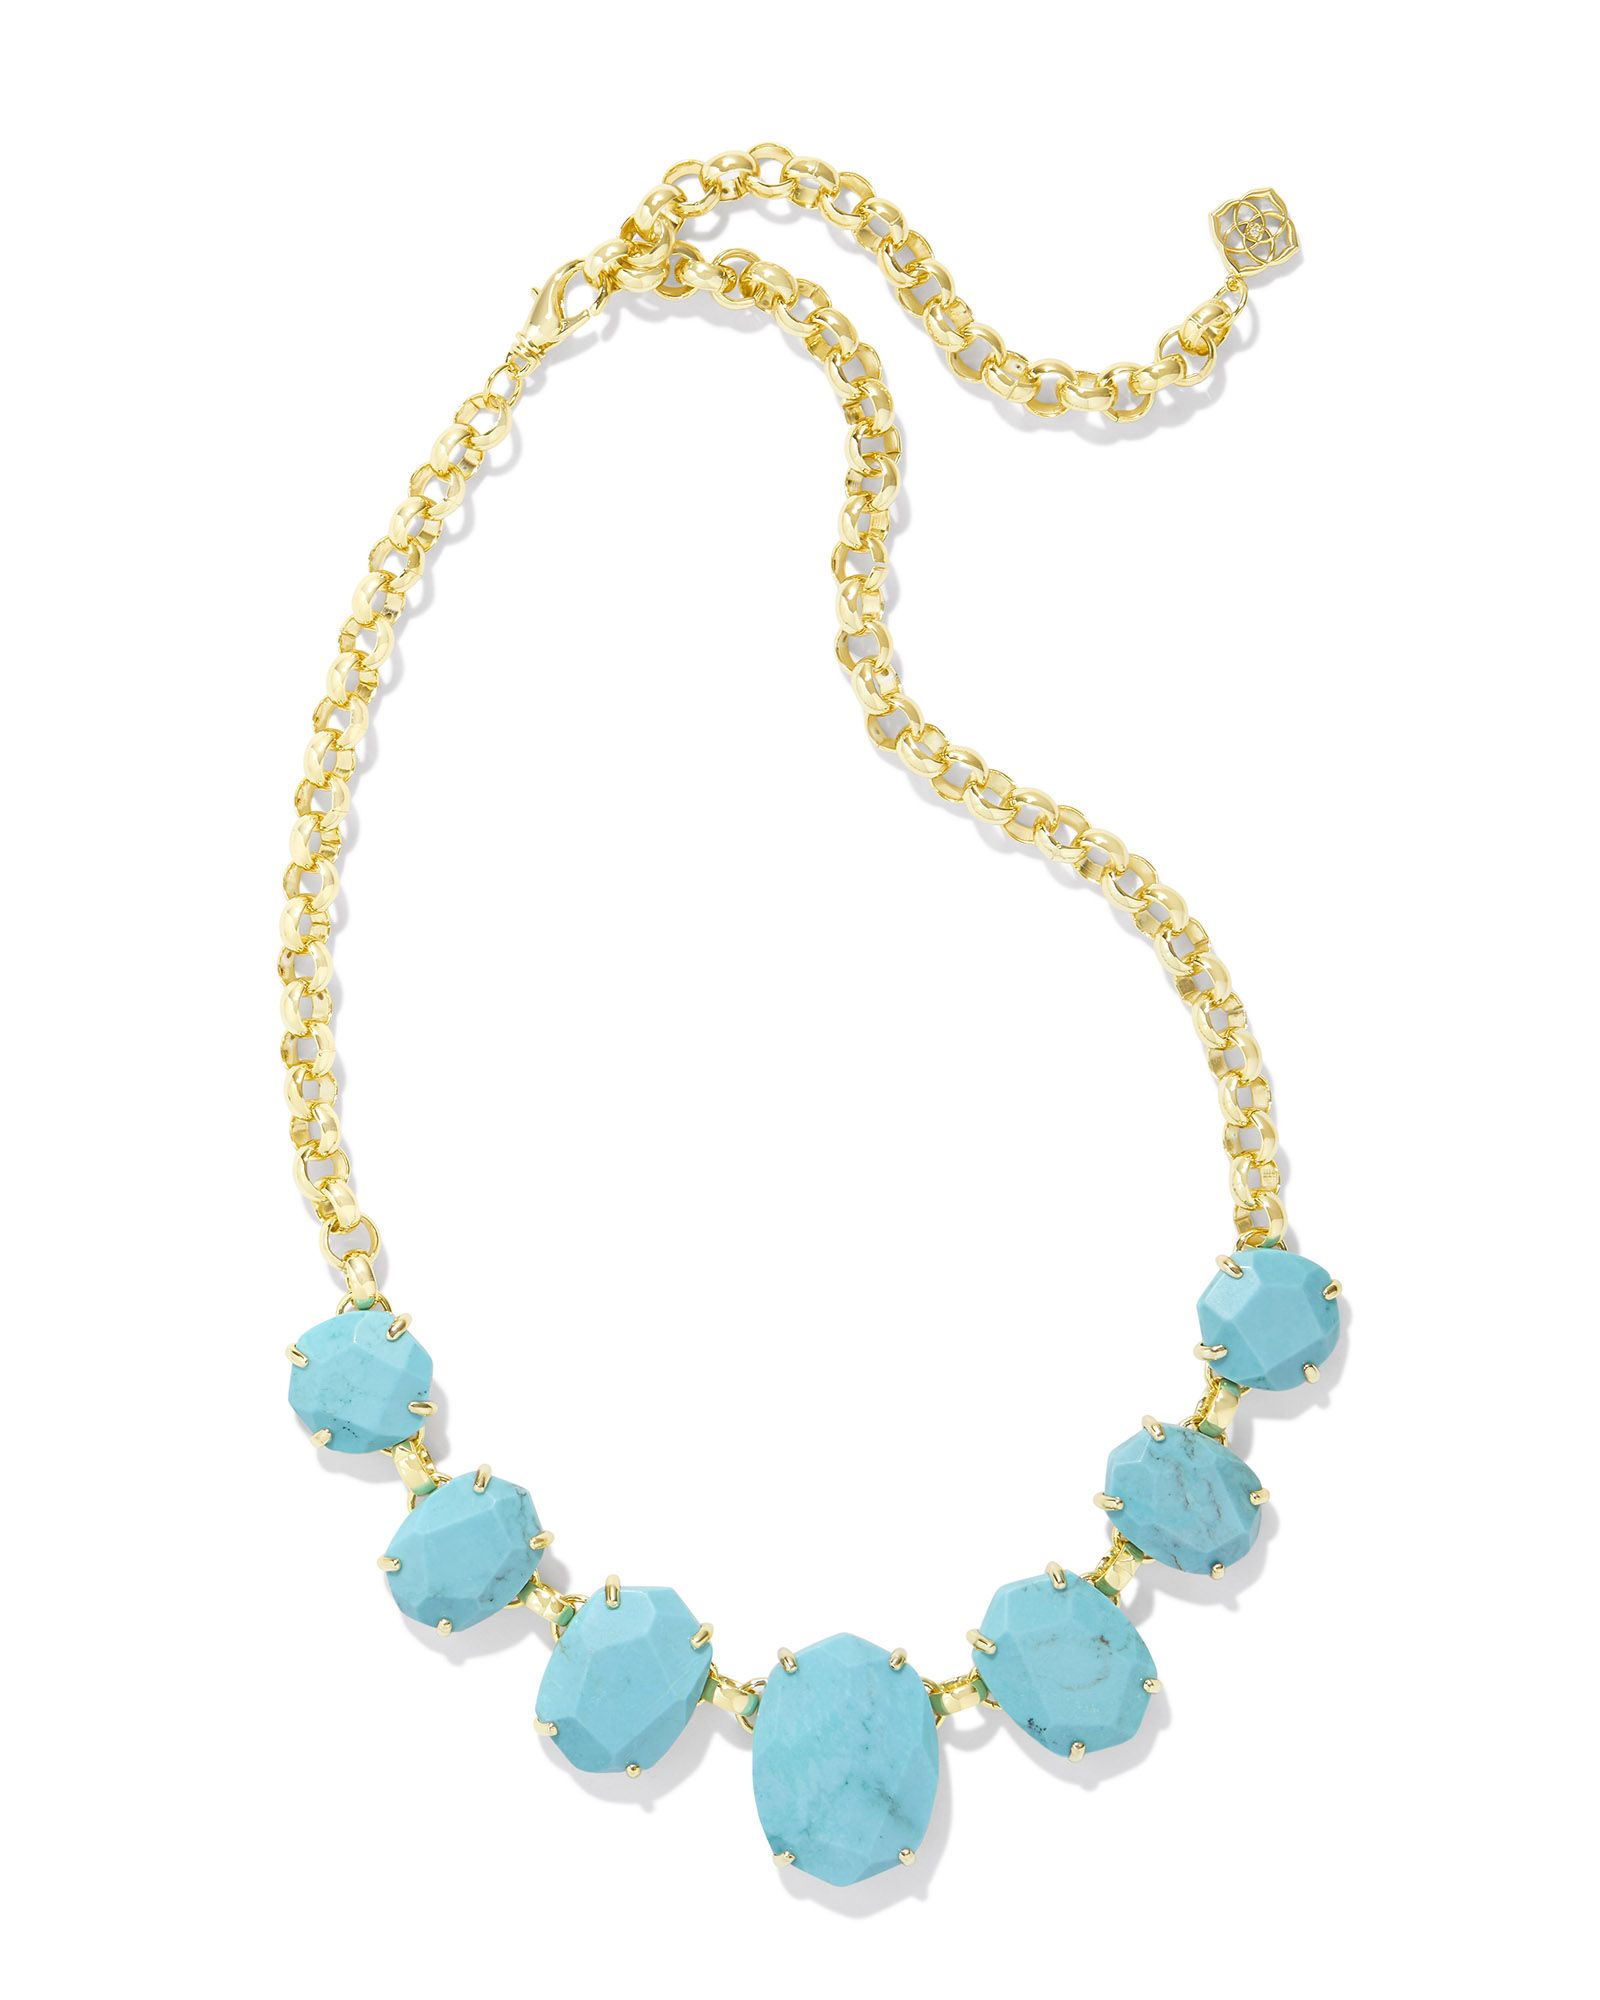 Daphne Gold Statement Necklace in Variegated Turquoise Magnesite | Kendra Scott